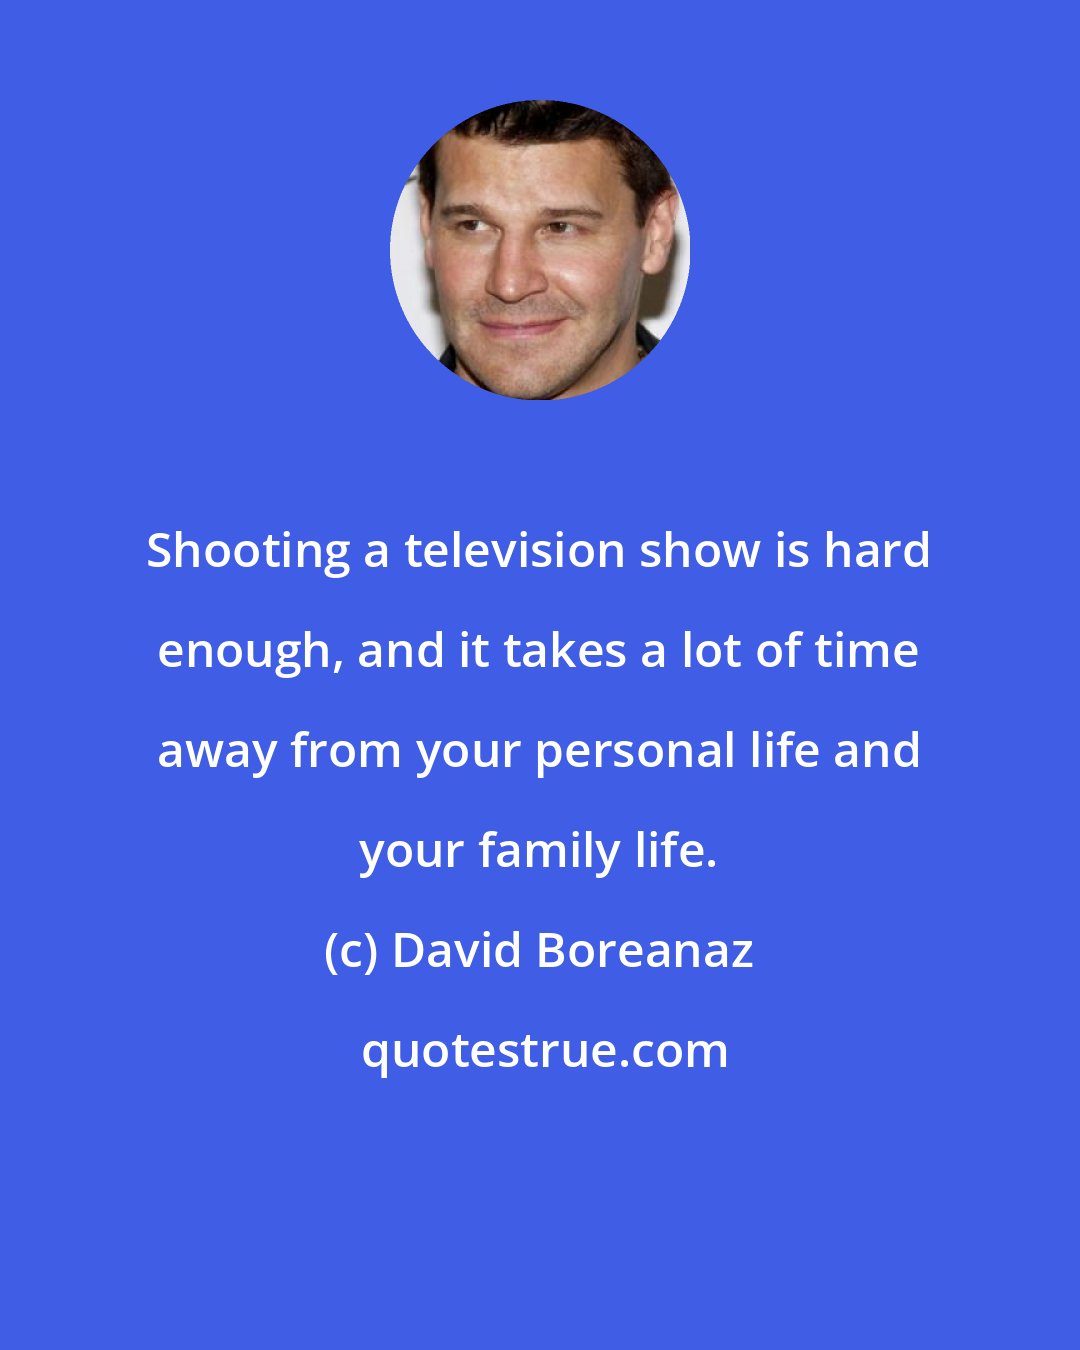 David Boreanaz: Shooting a television show is hard enough, and it takes a lot of time away from your personal life and your family life.